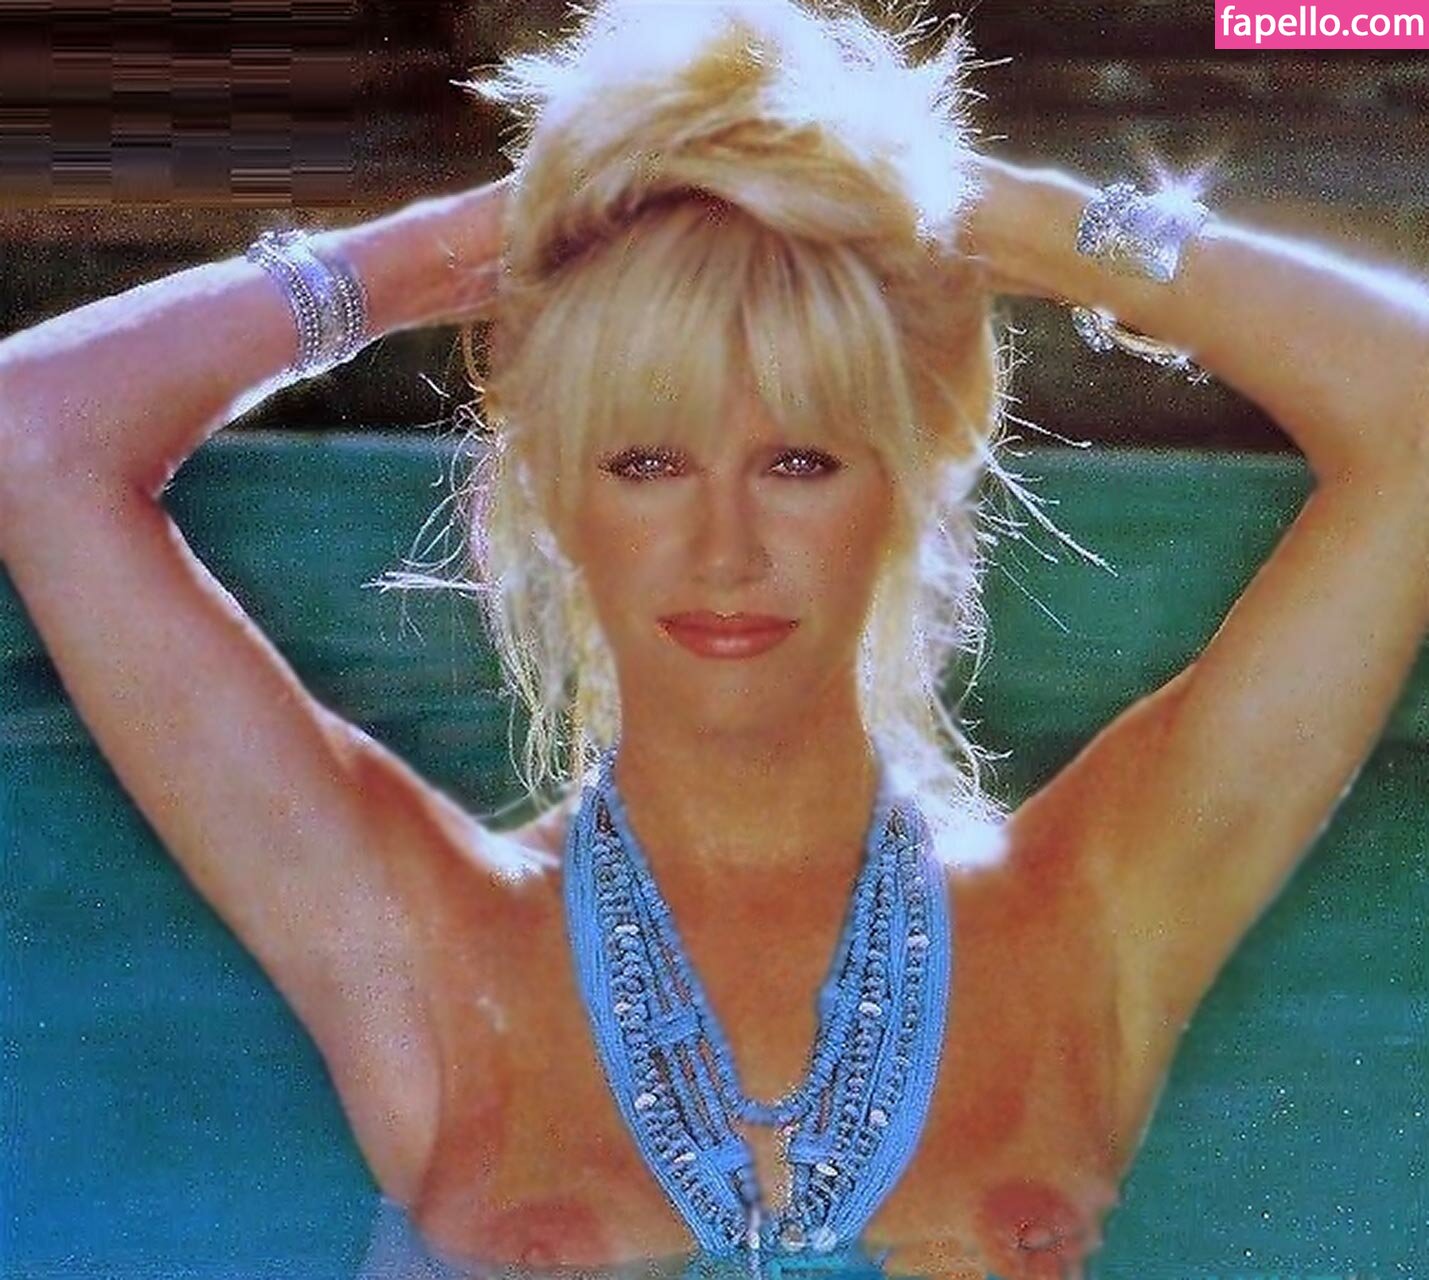 Suzanne Somers  suzannesomers Nude Leaked Photo #5 - Fapello.